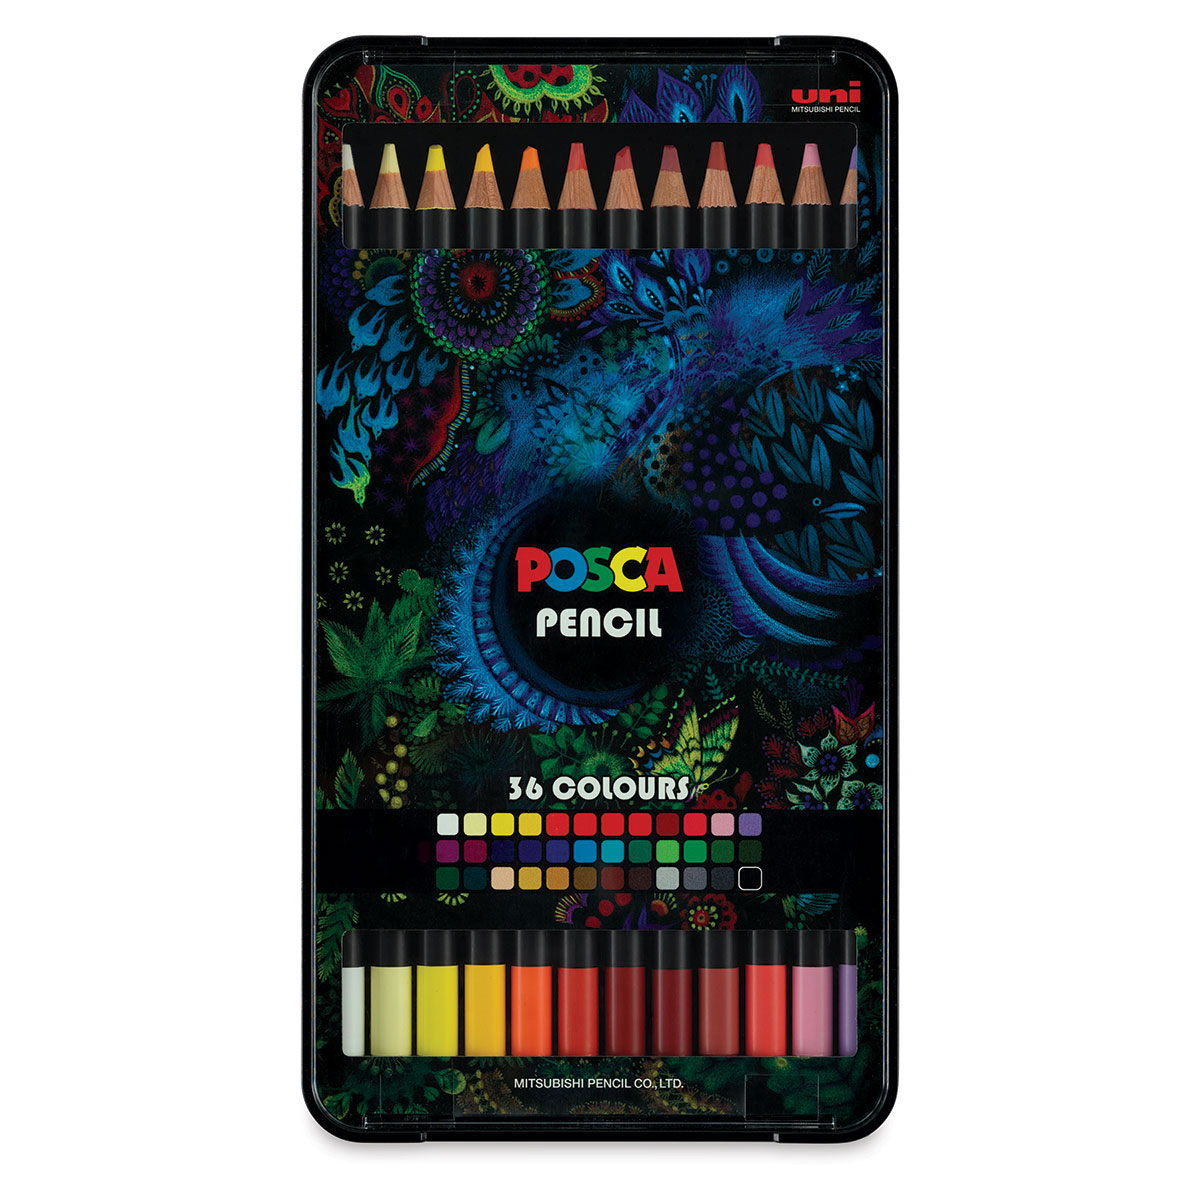 Live - Trying POSCA Colored Pencils #drawingandsketching